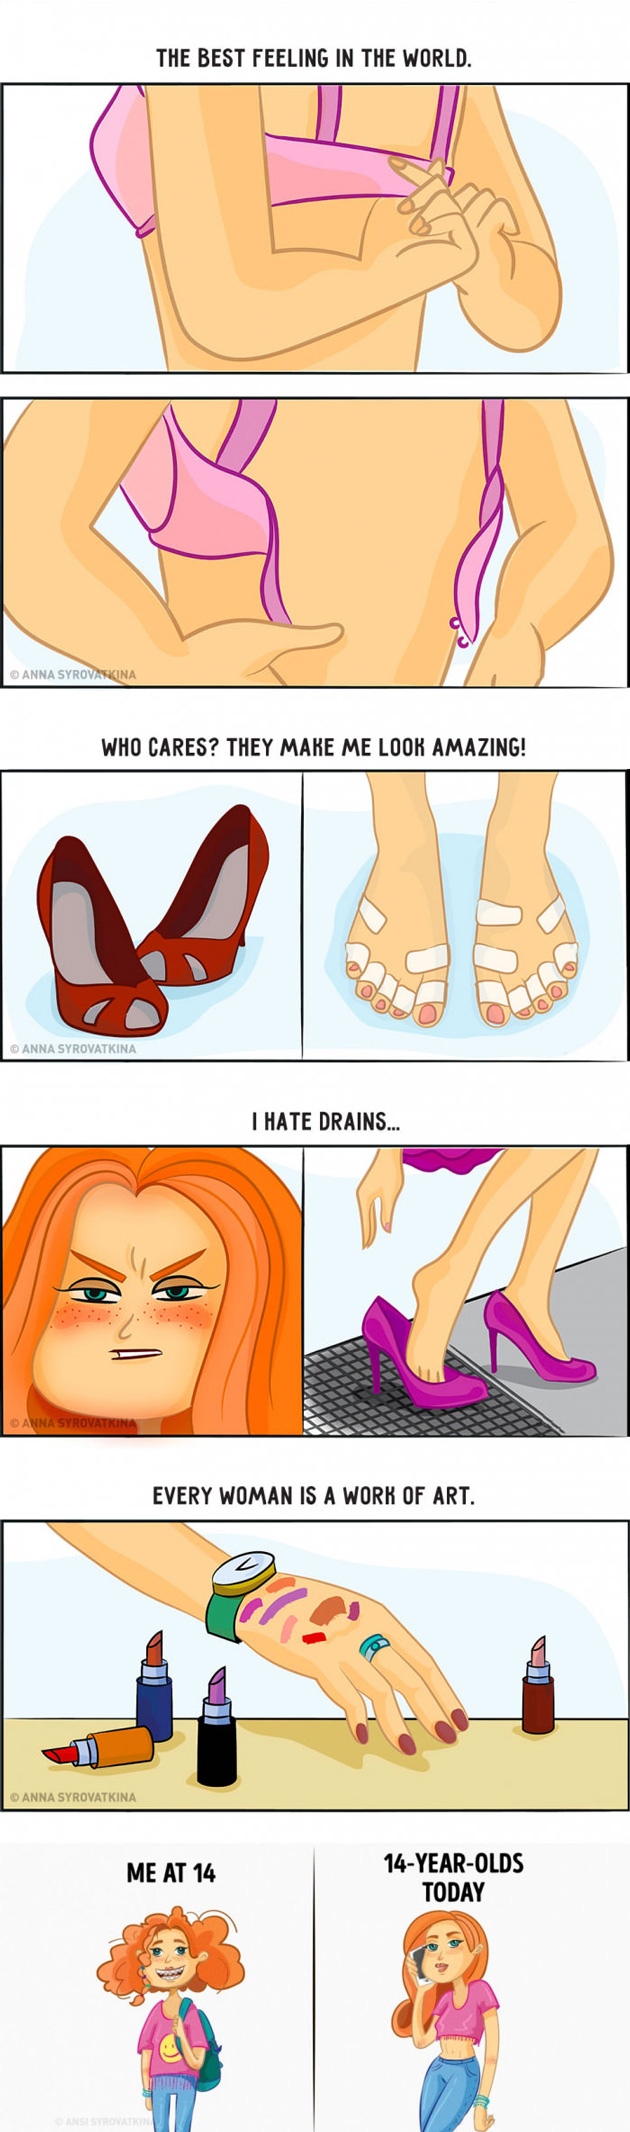 12 wonderfully amusing illustrations every woman will understand_03